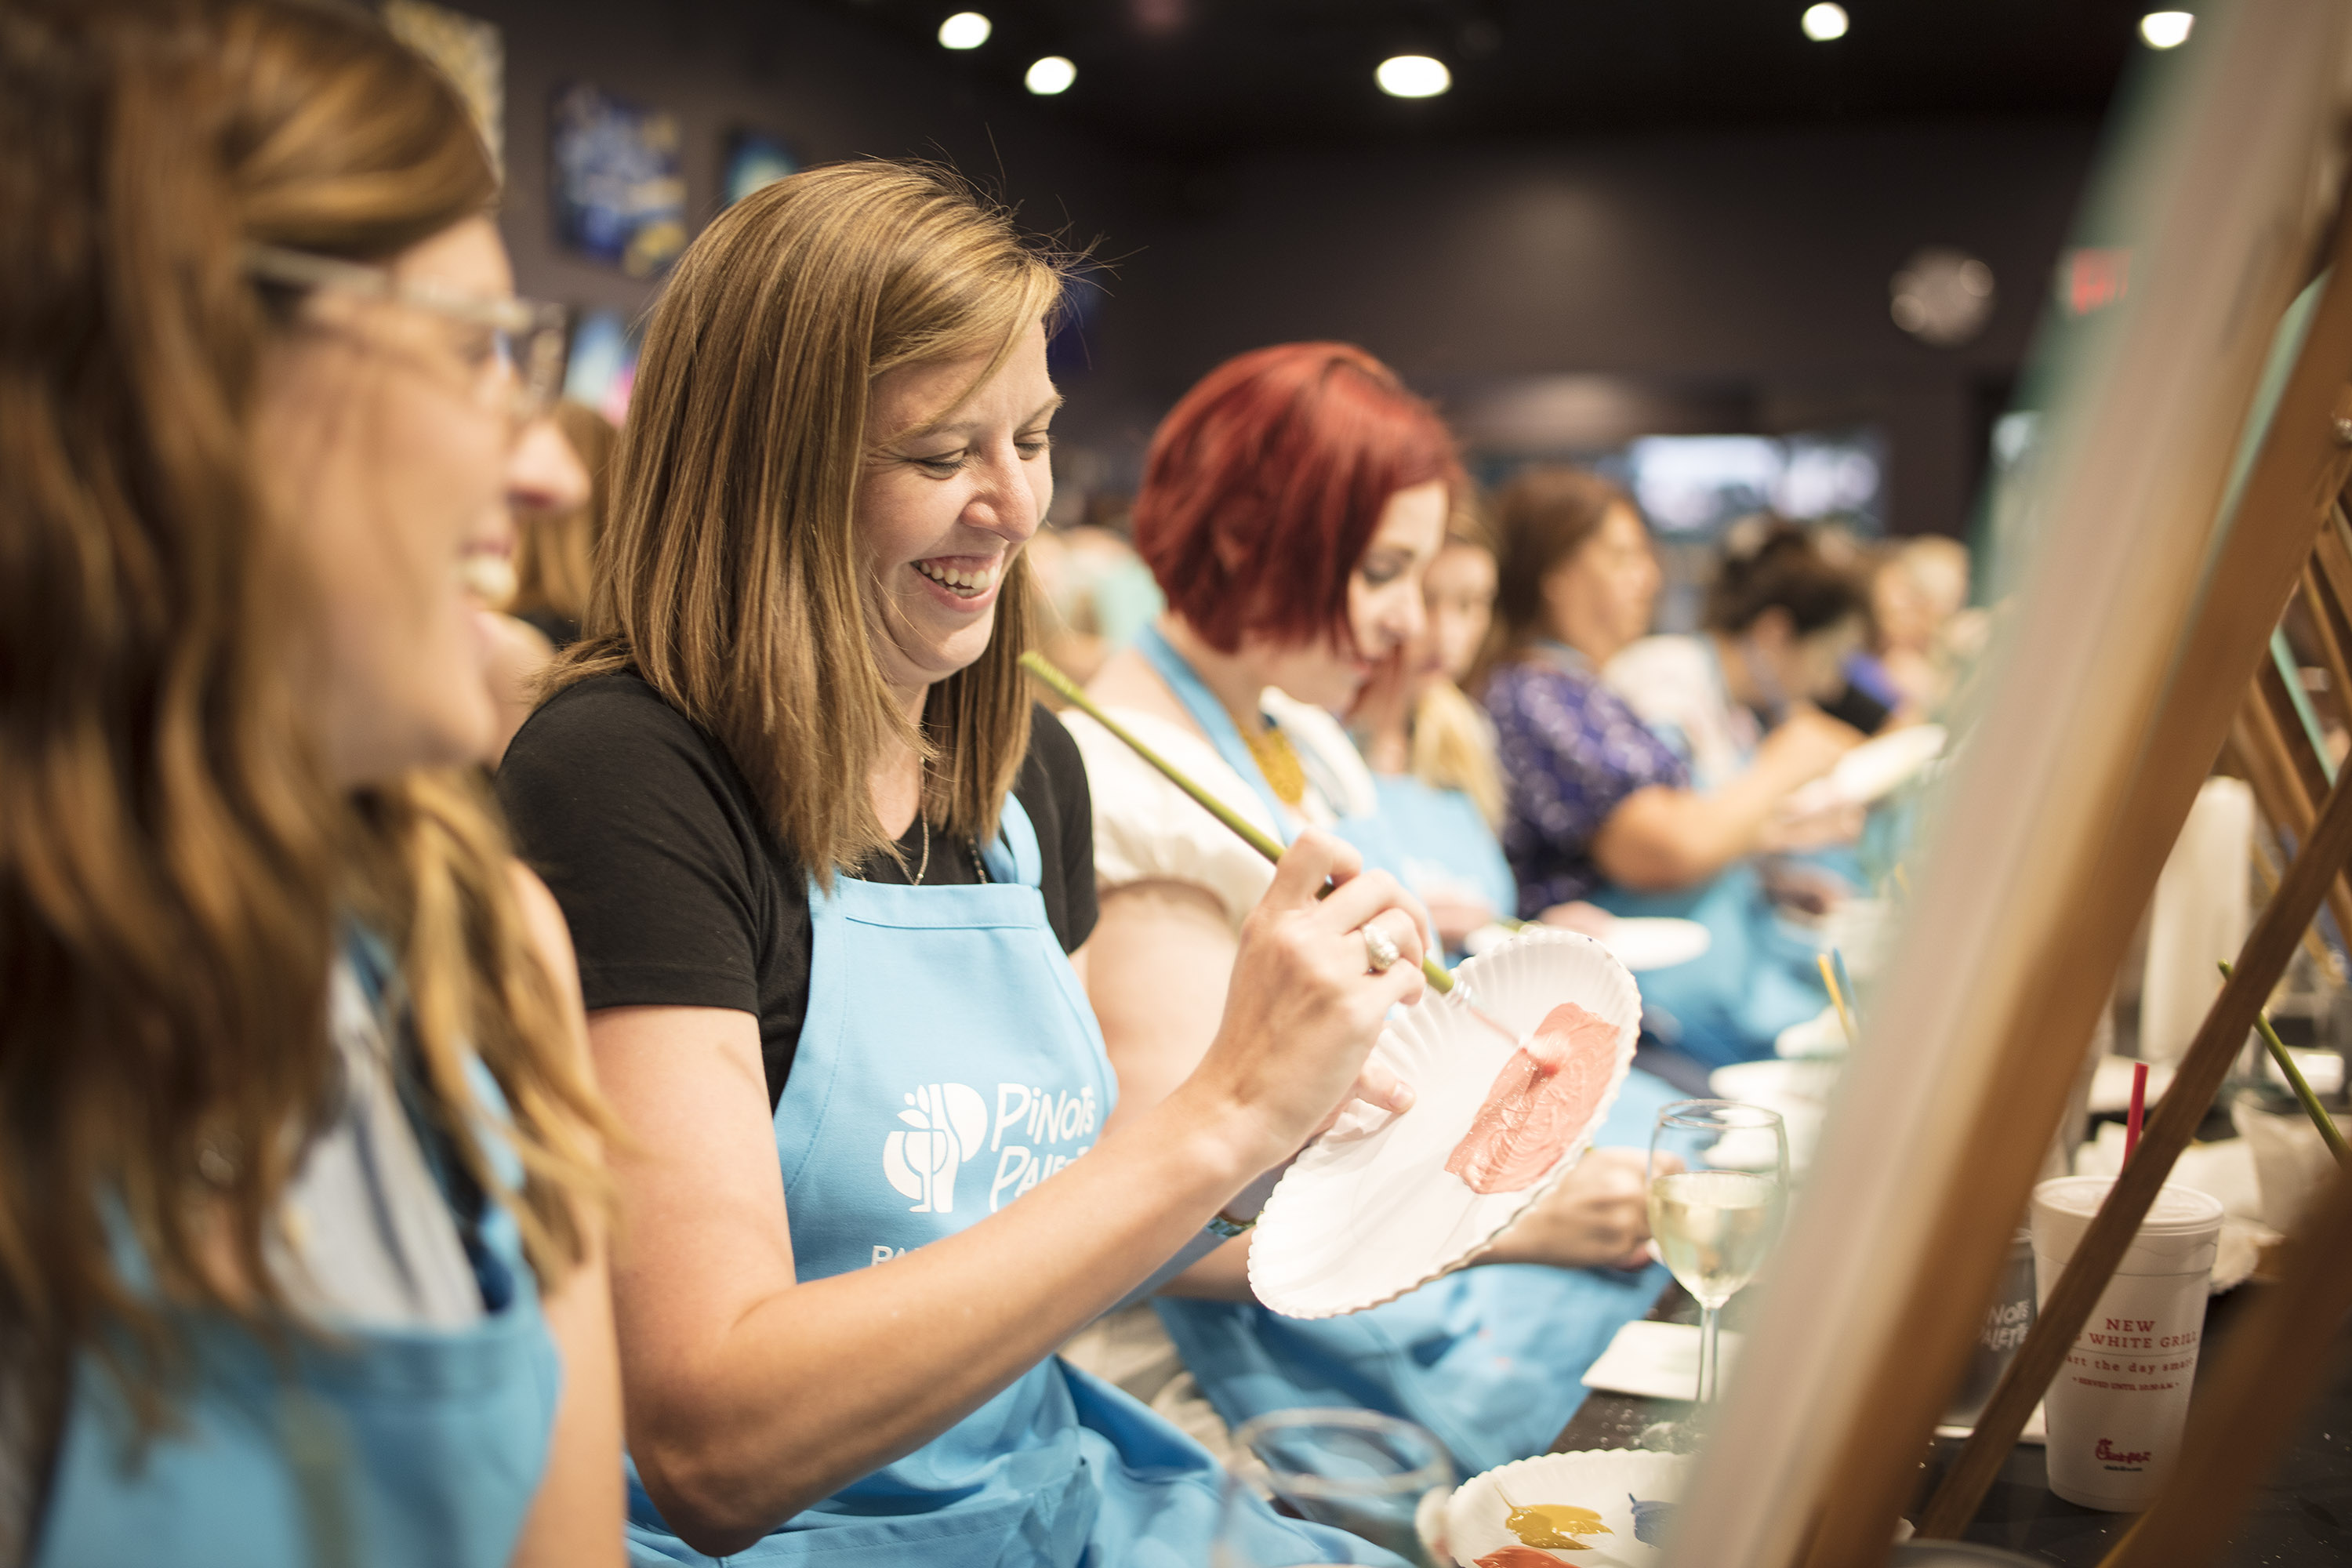 7 Tips for a Great Paint & Sip Night